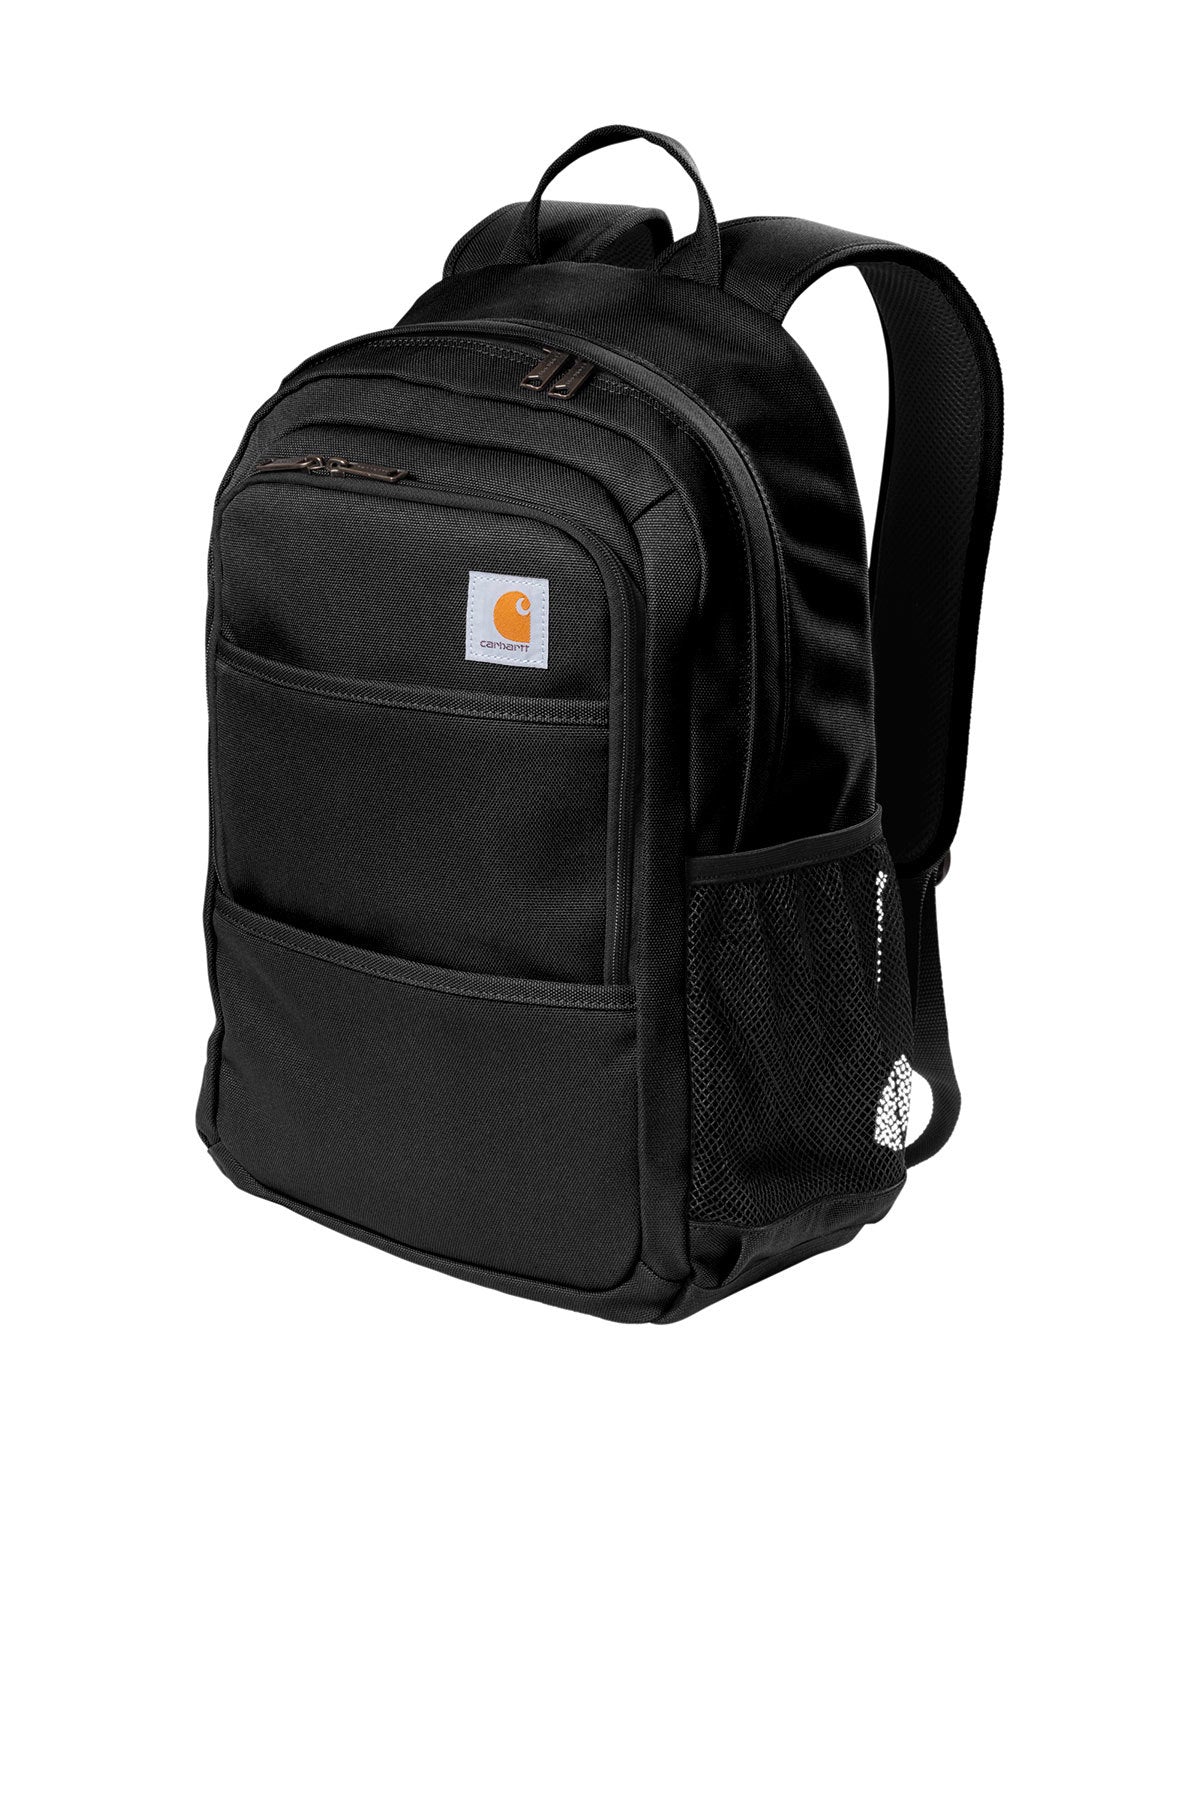 CT89350303 Carhartt Foundry Series Backpack